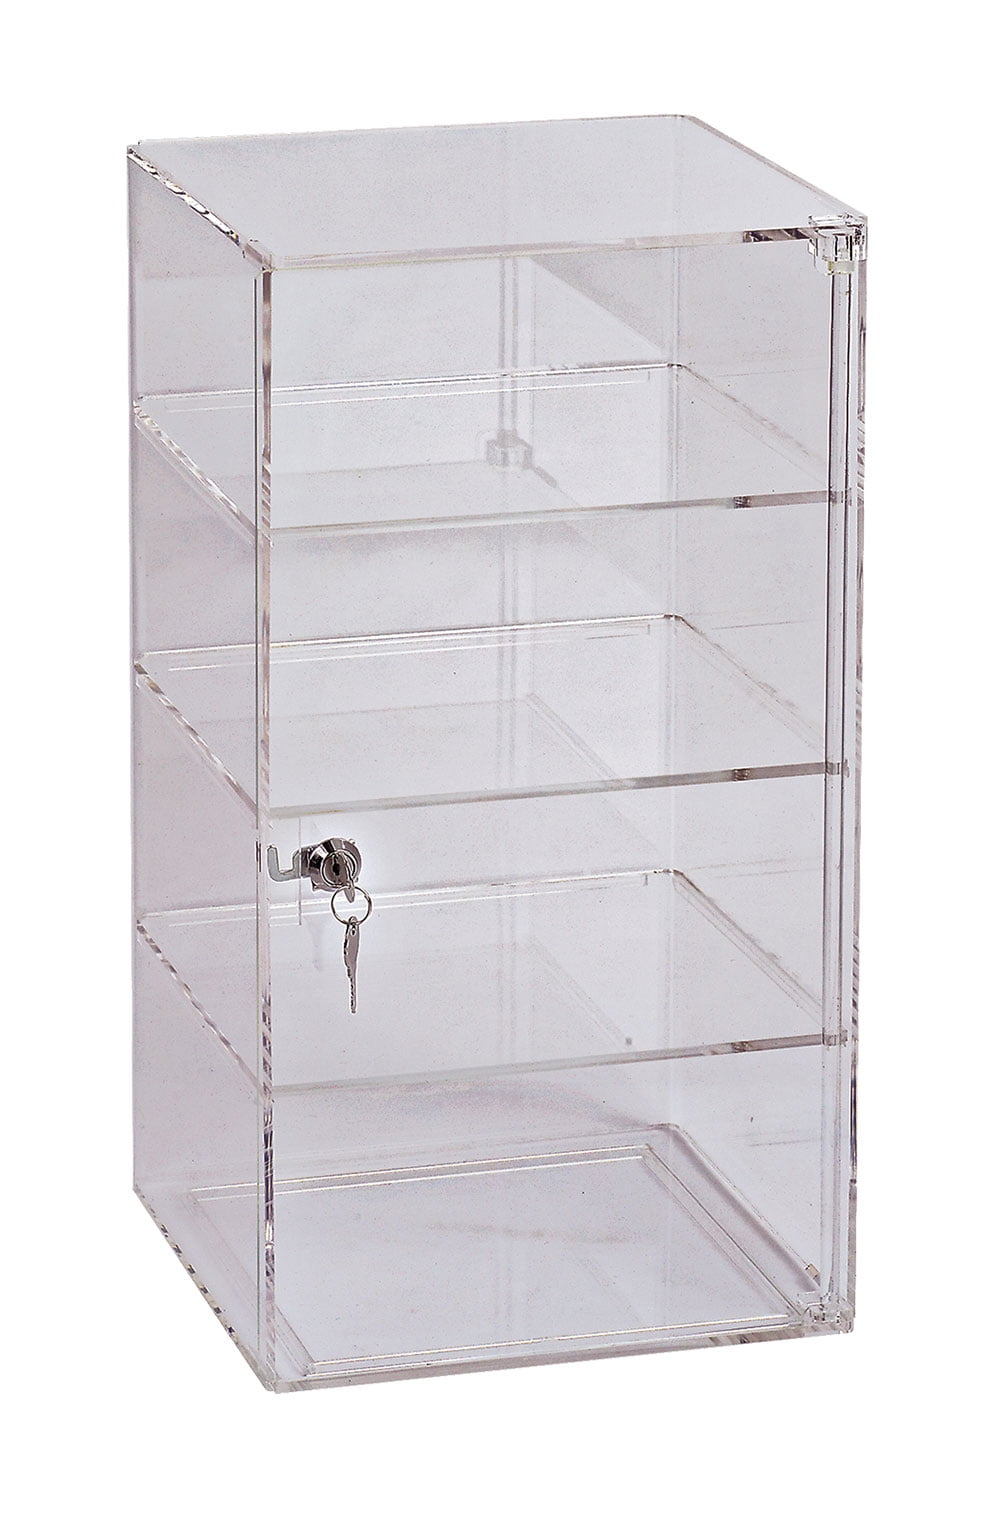 ACRYLIC LOCKING DISPLAY CASE NEW RETAIL STORE PARTS AND JUICE CABINET 